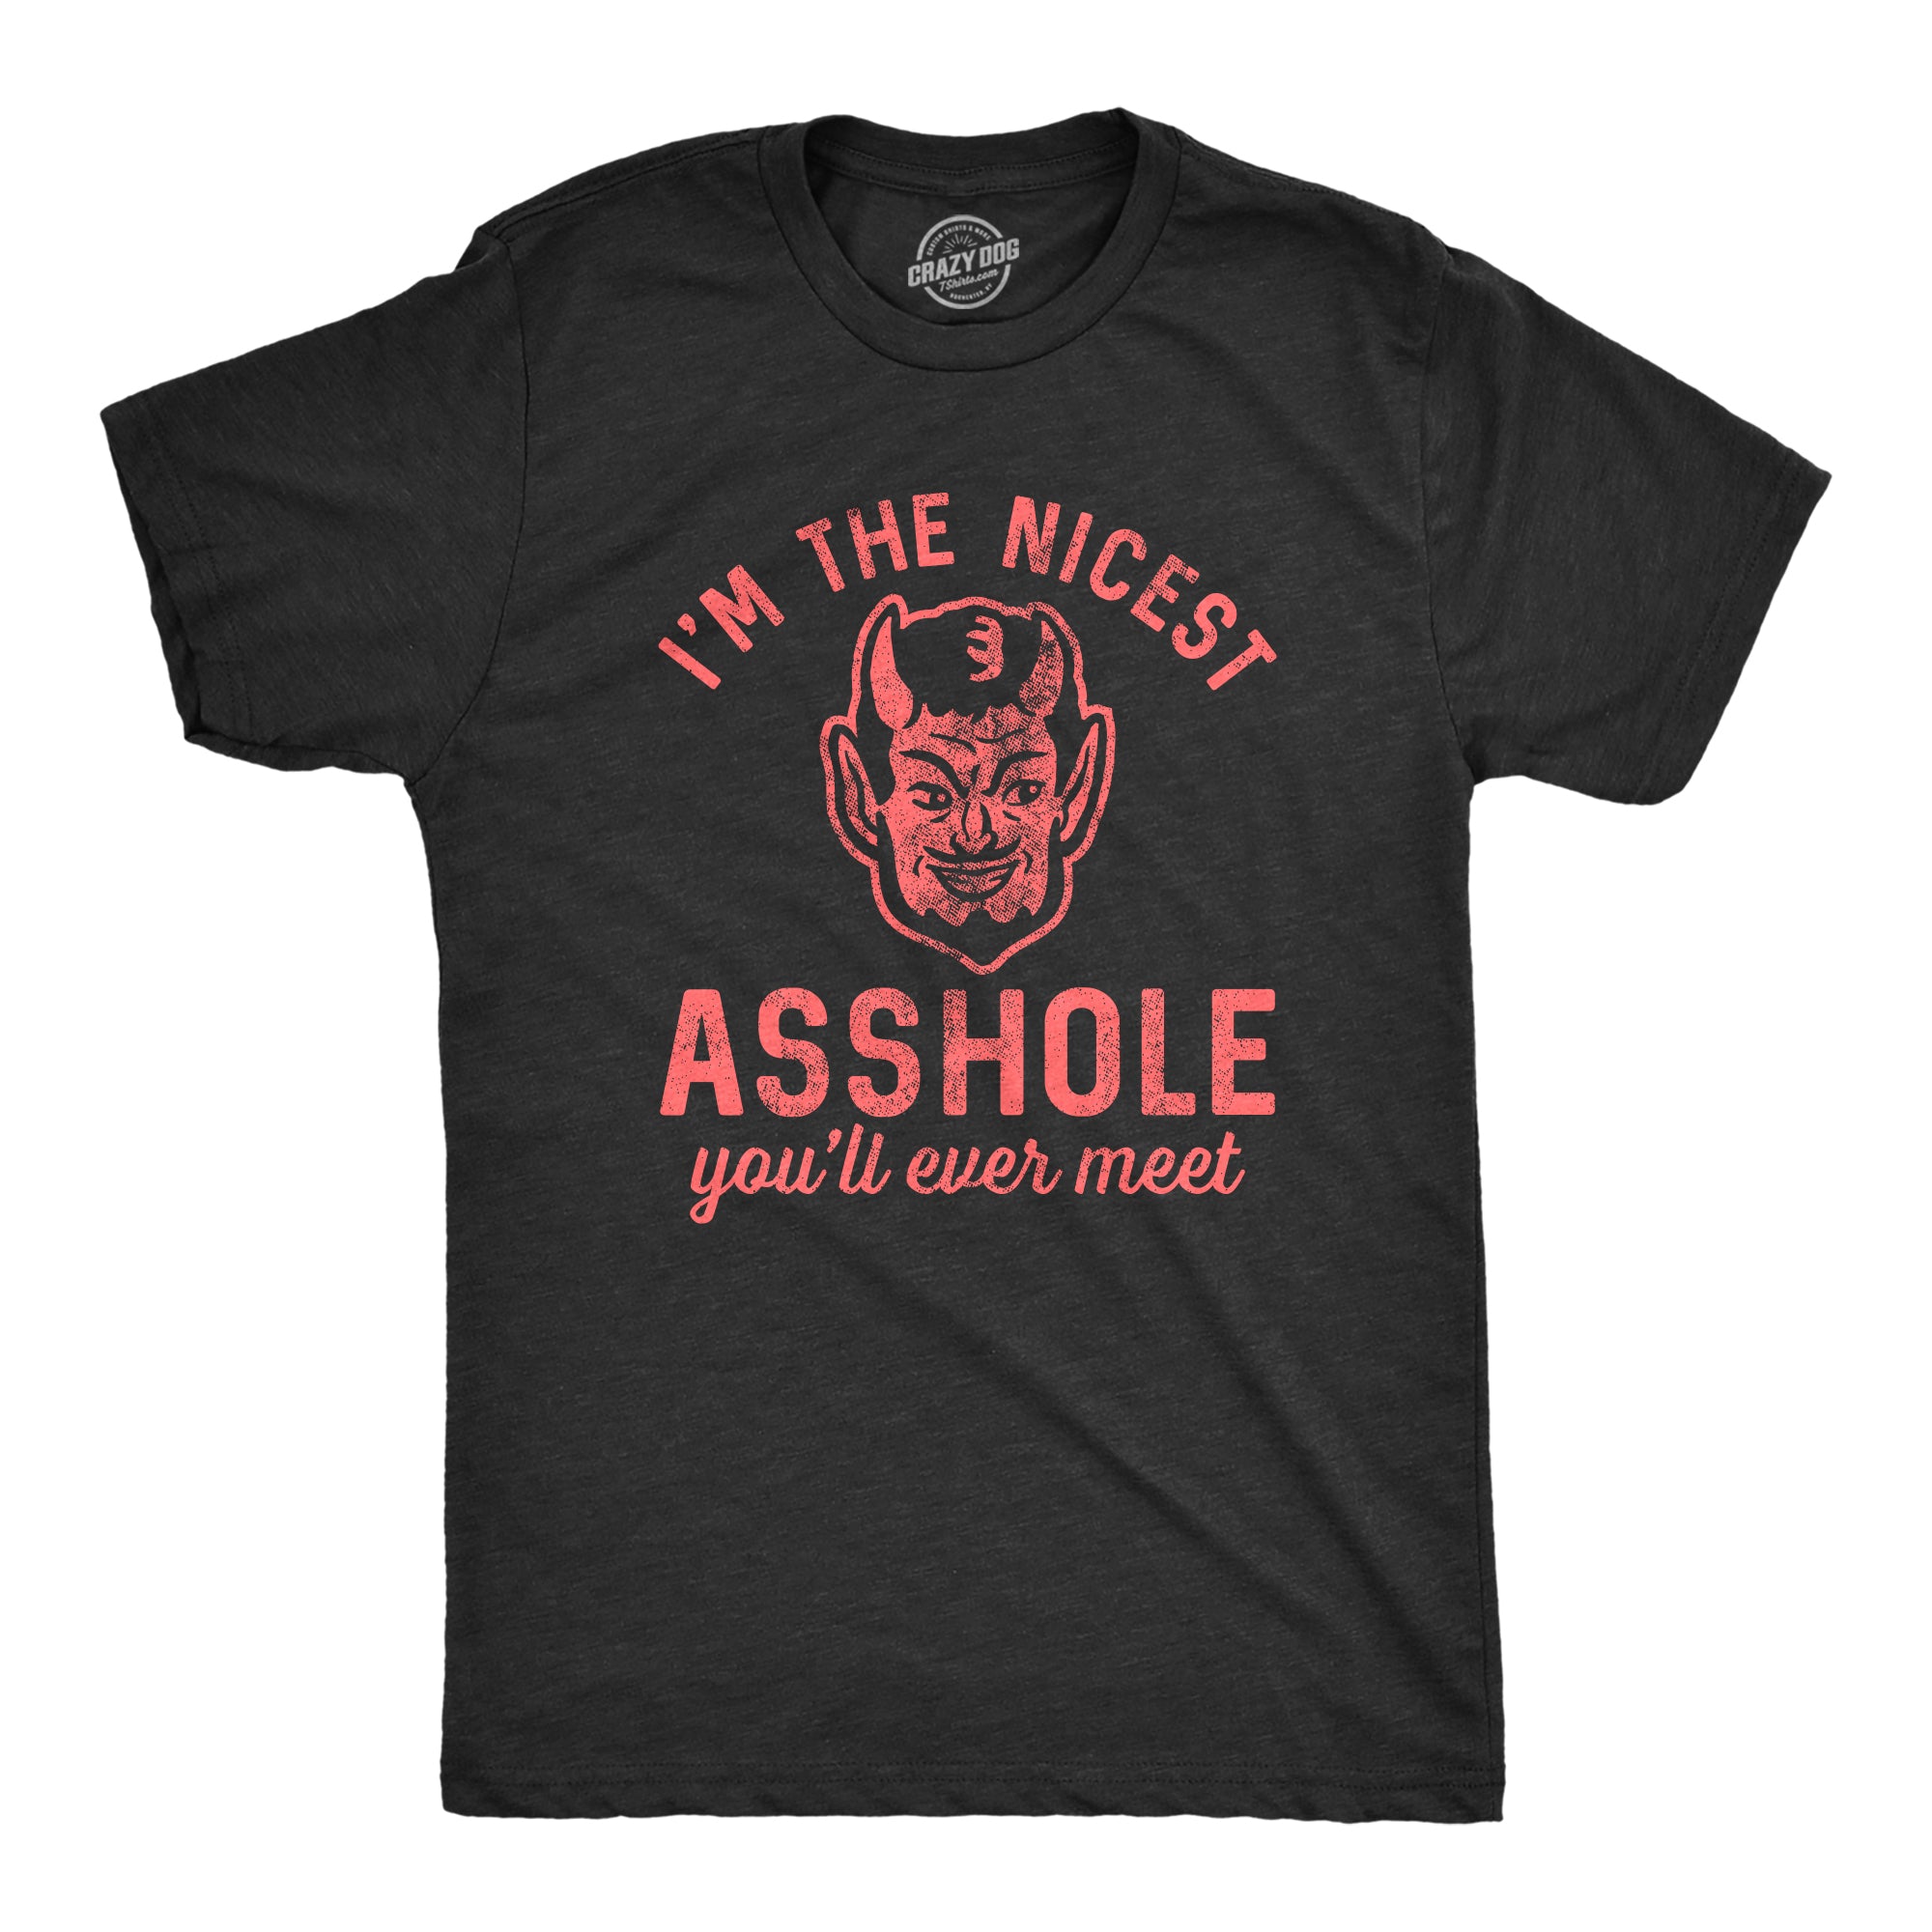 Funny Heather Black - Nicest Ahole I'm The Nicest Asshole You'll Ever Meet Mens T Shirt Nerdy Sarcastic Tee